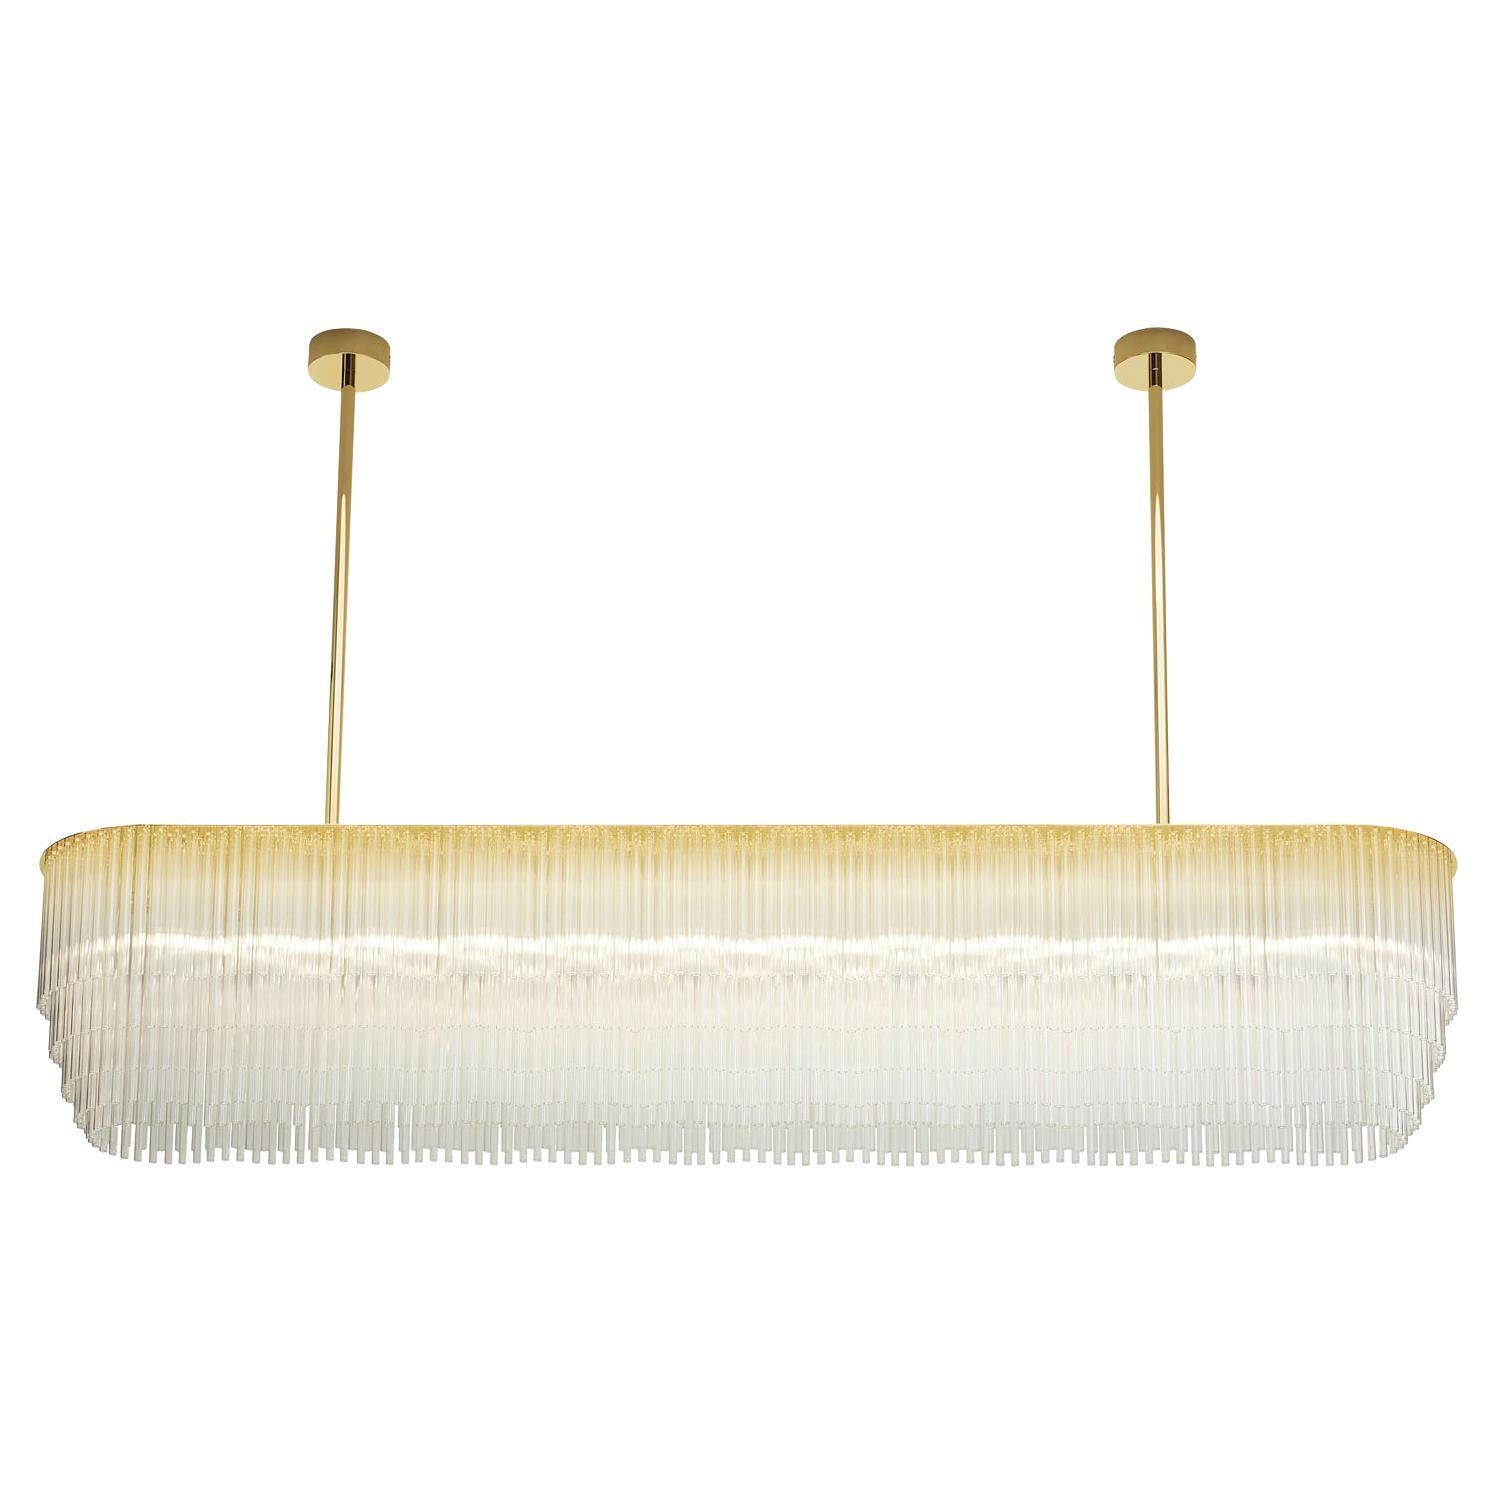 Linear Chandelier 1479mm / 58.25" in Polished Brass with Tiered Glass Profile For Sale